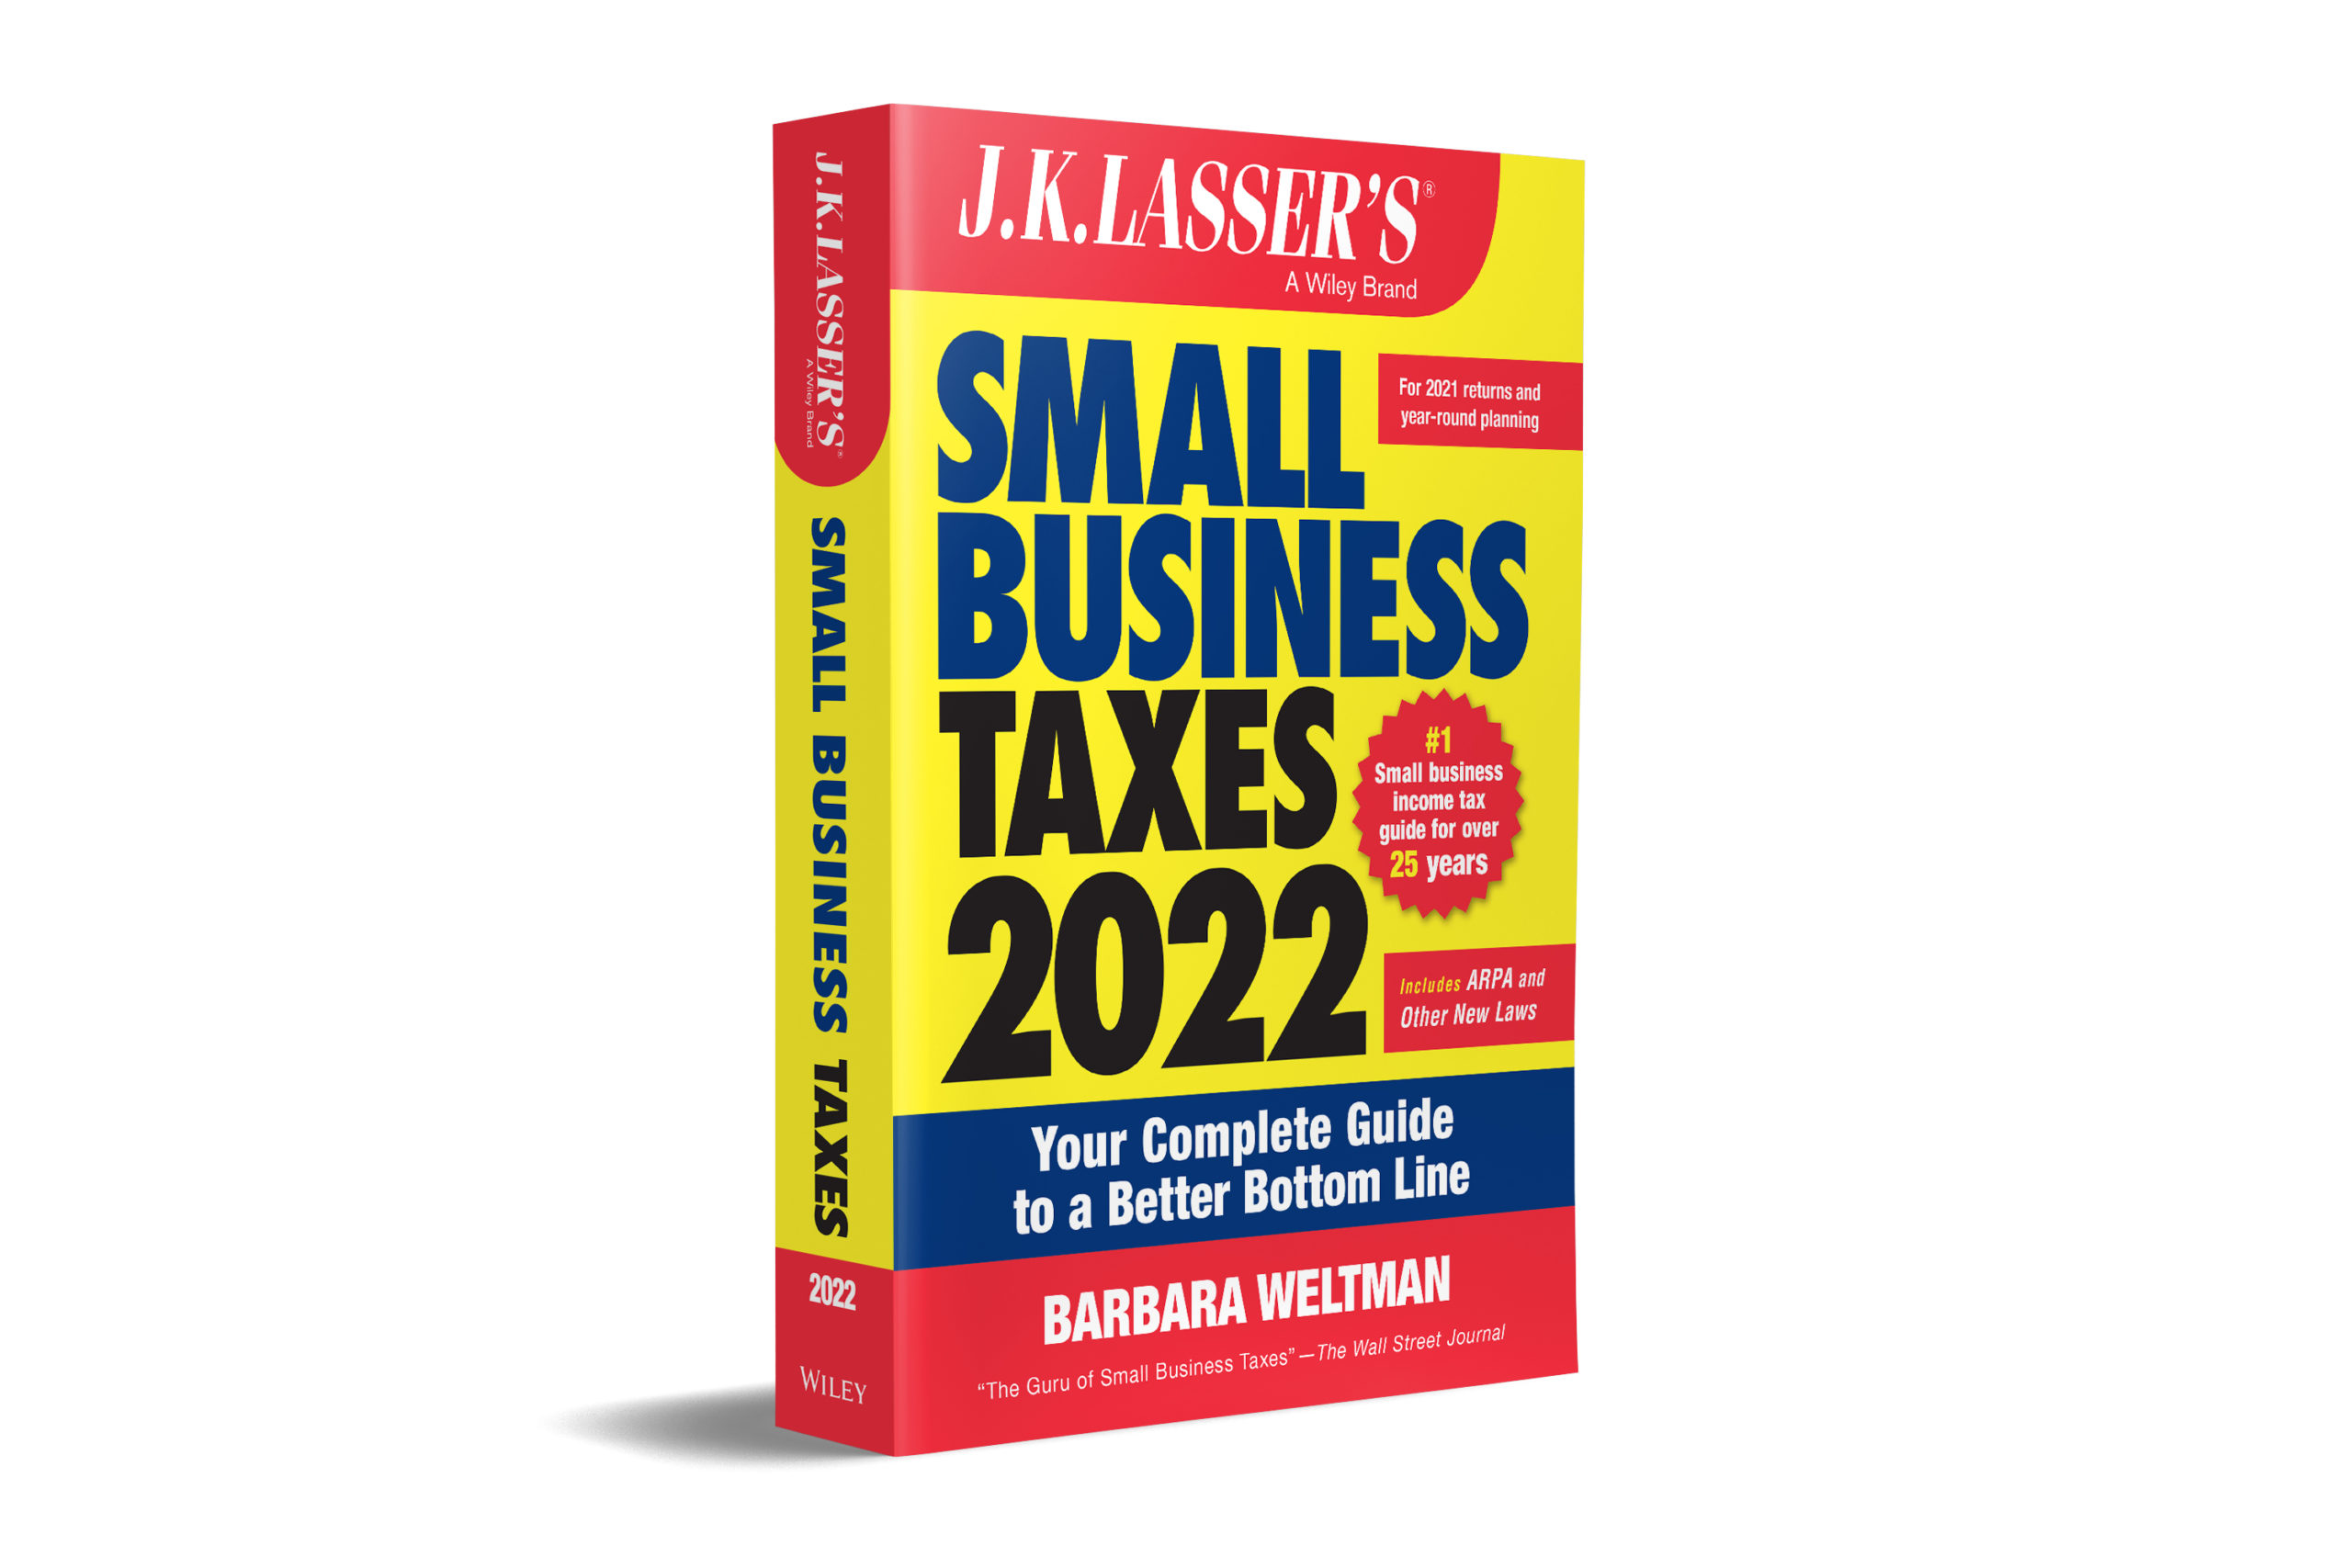 Small Business Taxes 2022